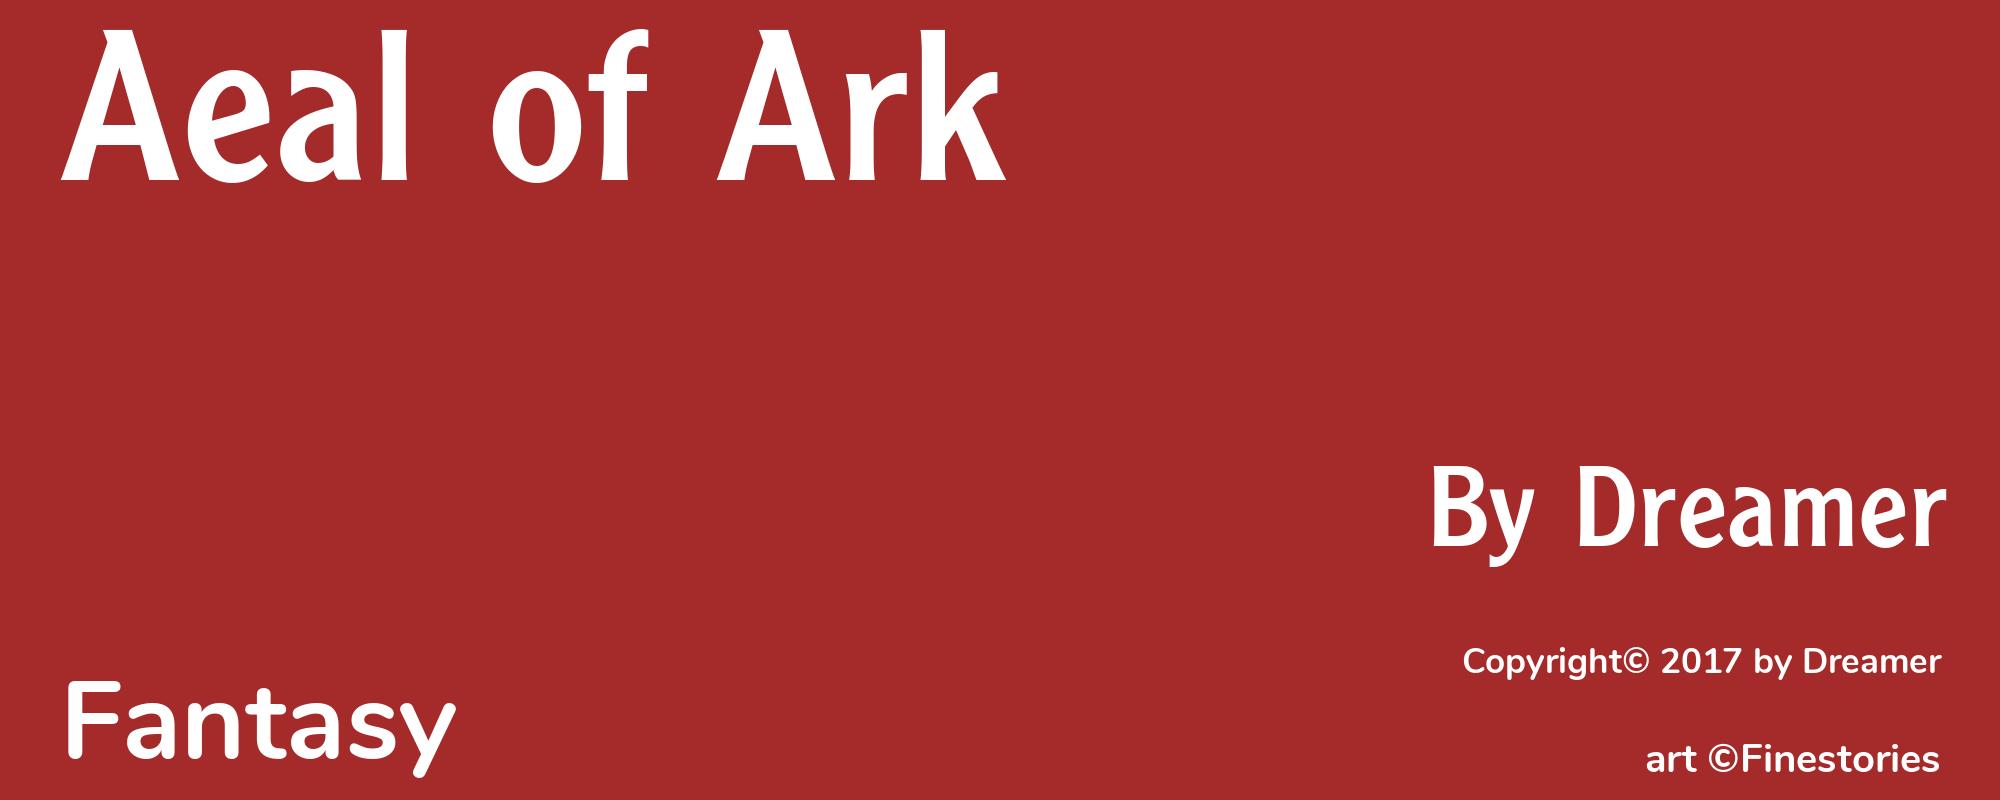 Aeal of Ark - Cover